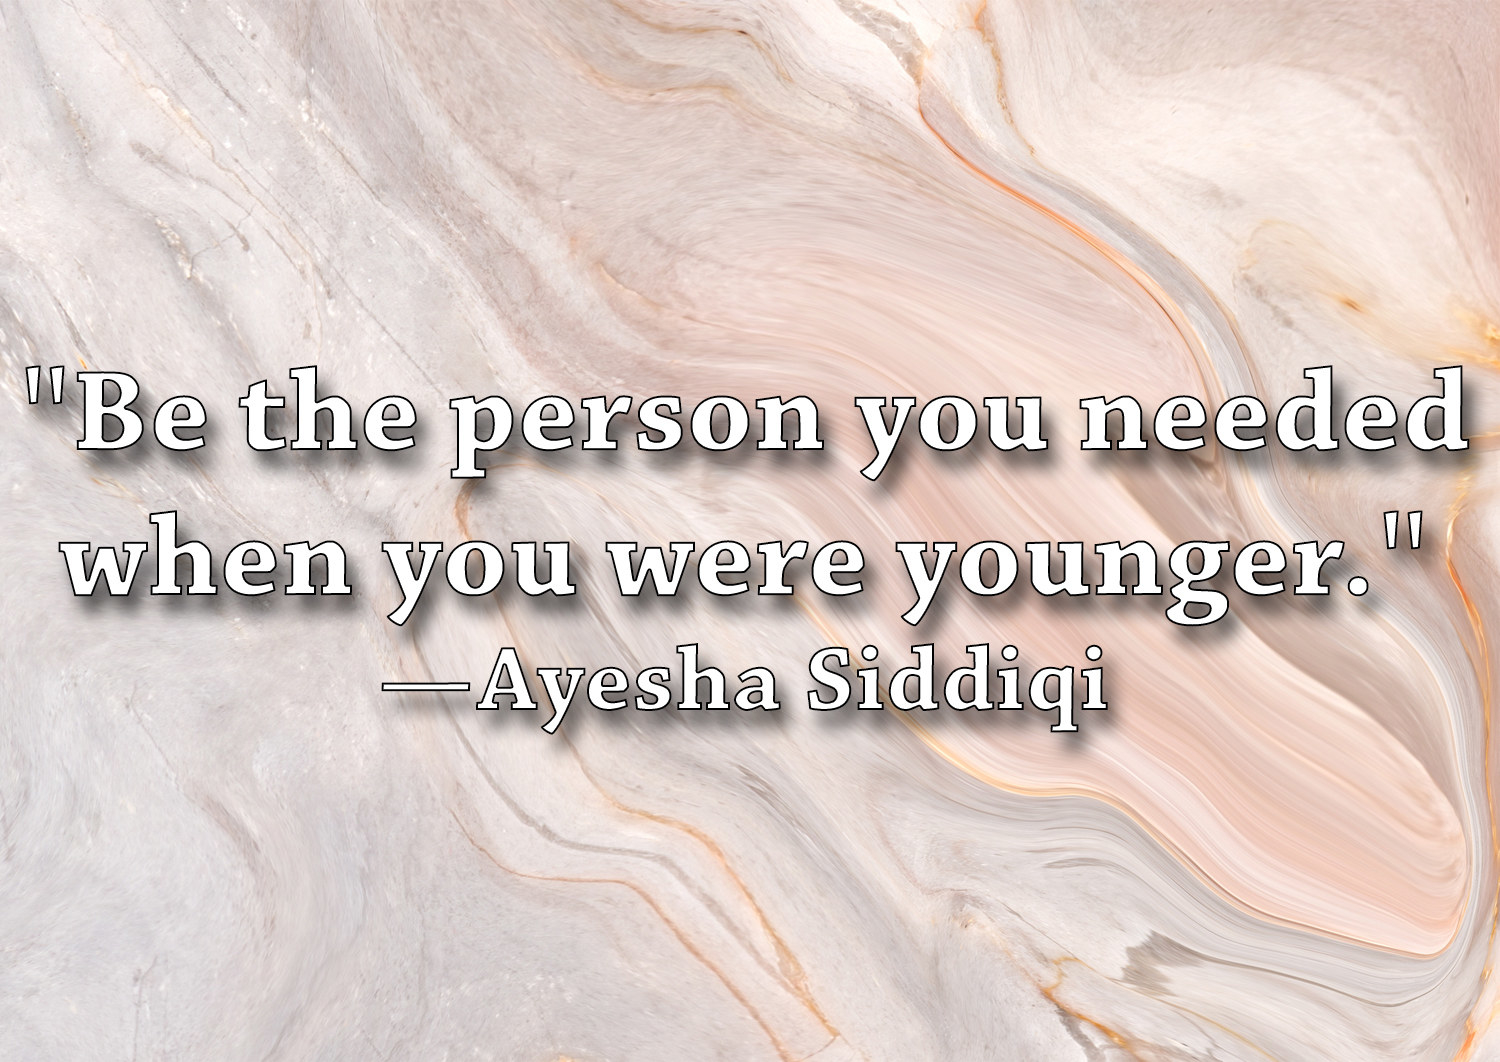 &quot;Be the person you needed when you were younger.&quot;